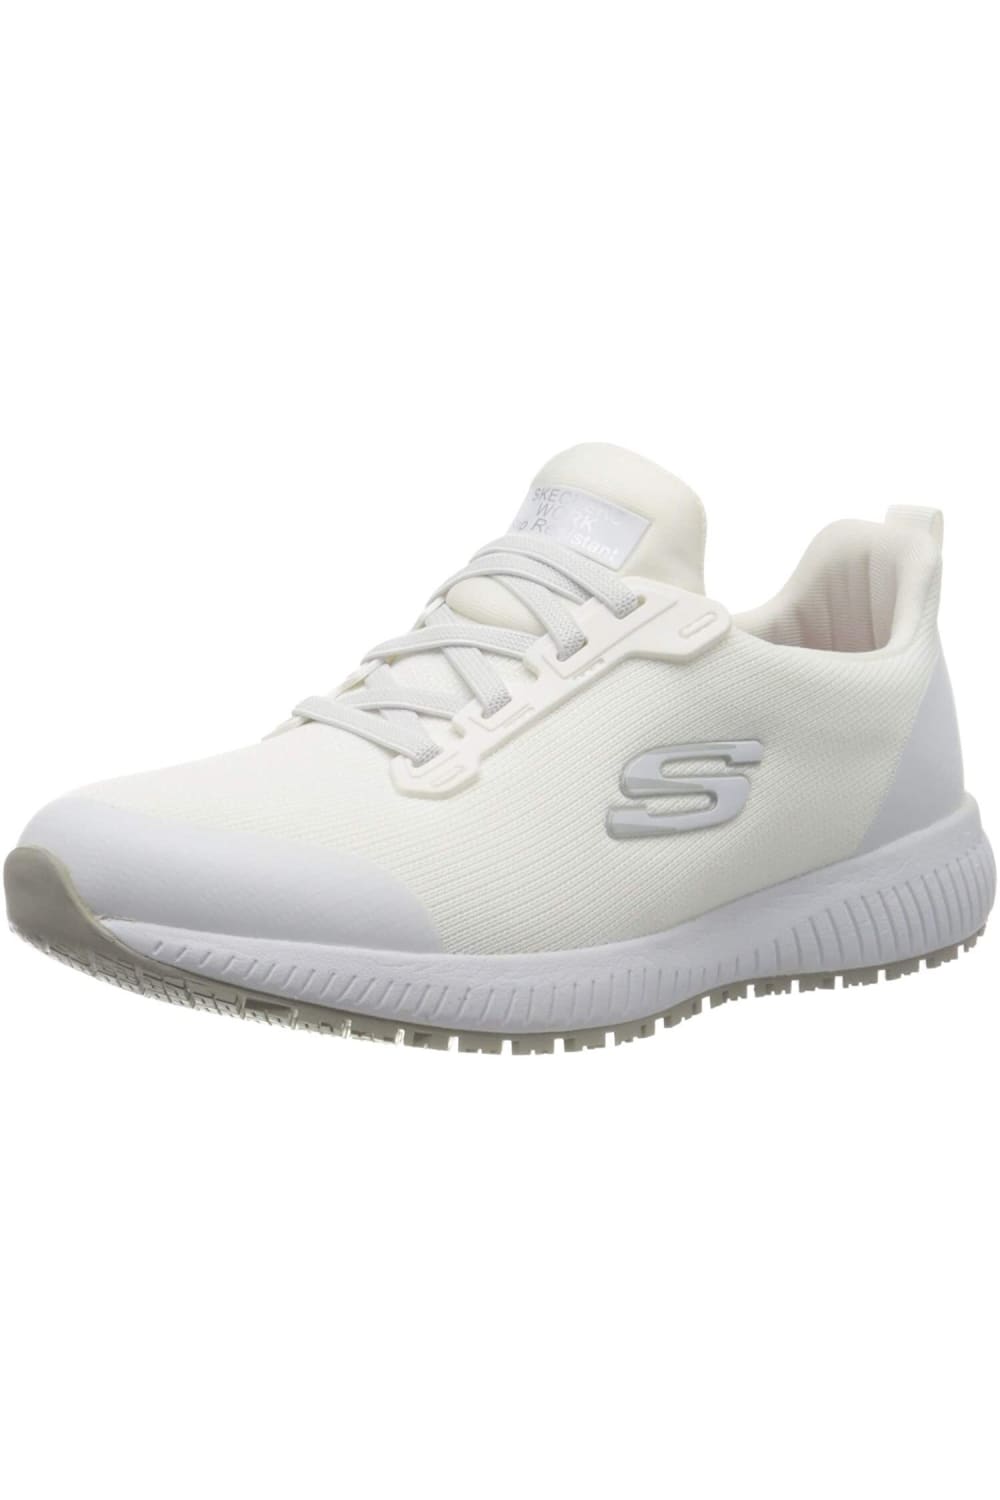 Womens/Ladies Safety Shoes - White